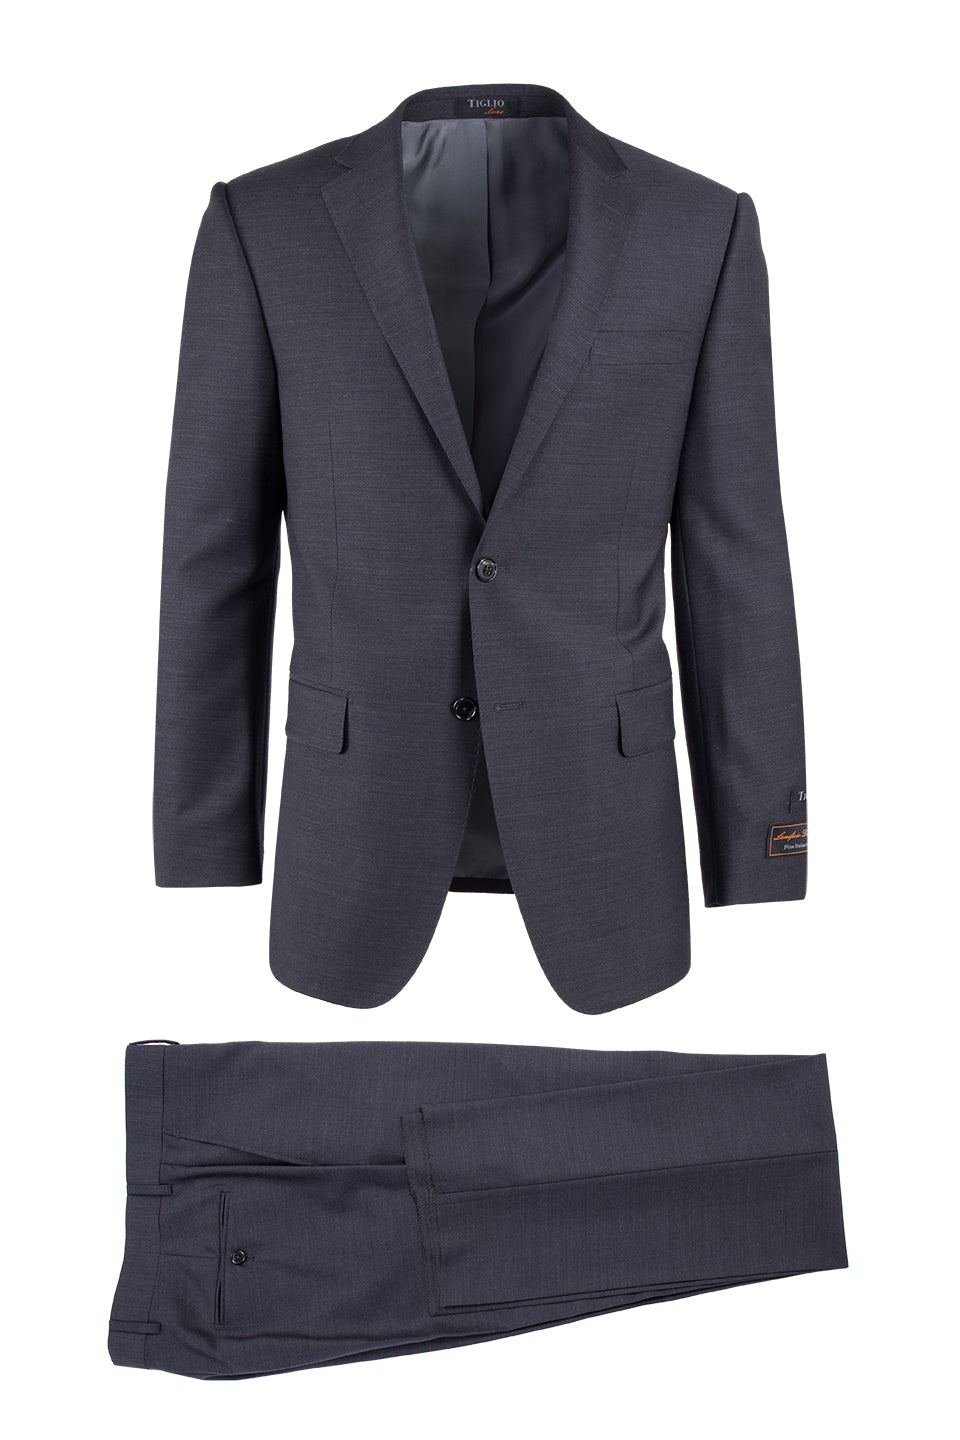 Luxe Novello by Charcoal Fit, TIG10 Tiglio Wool Tiglio Modern Suit | Pure Gray,